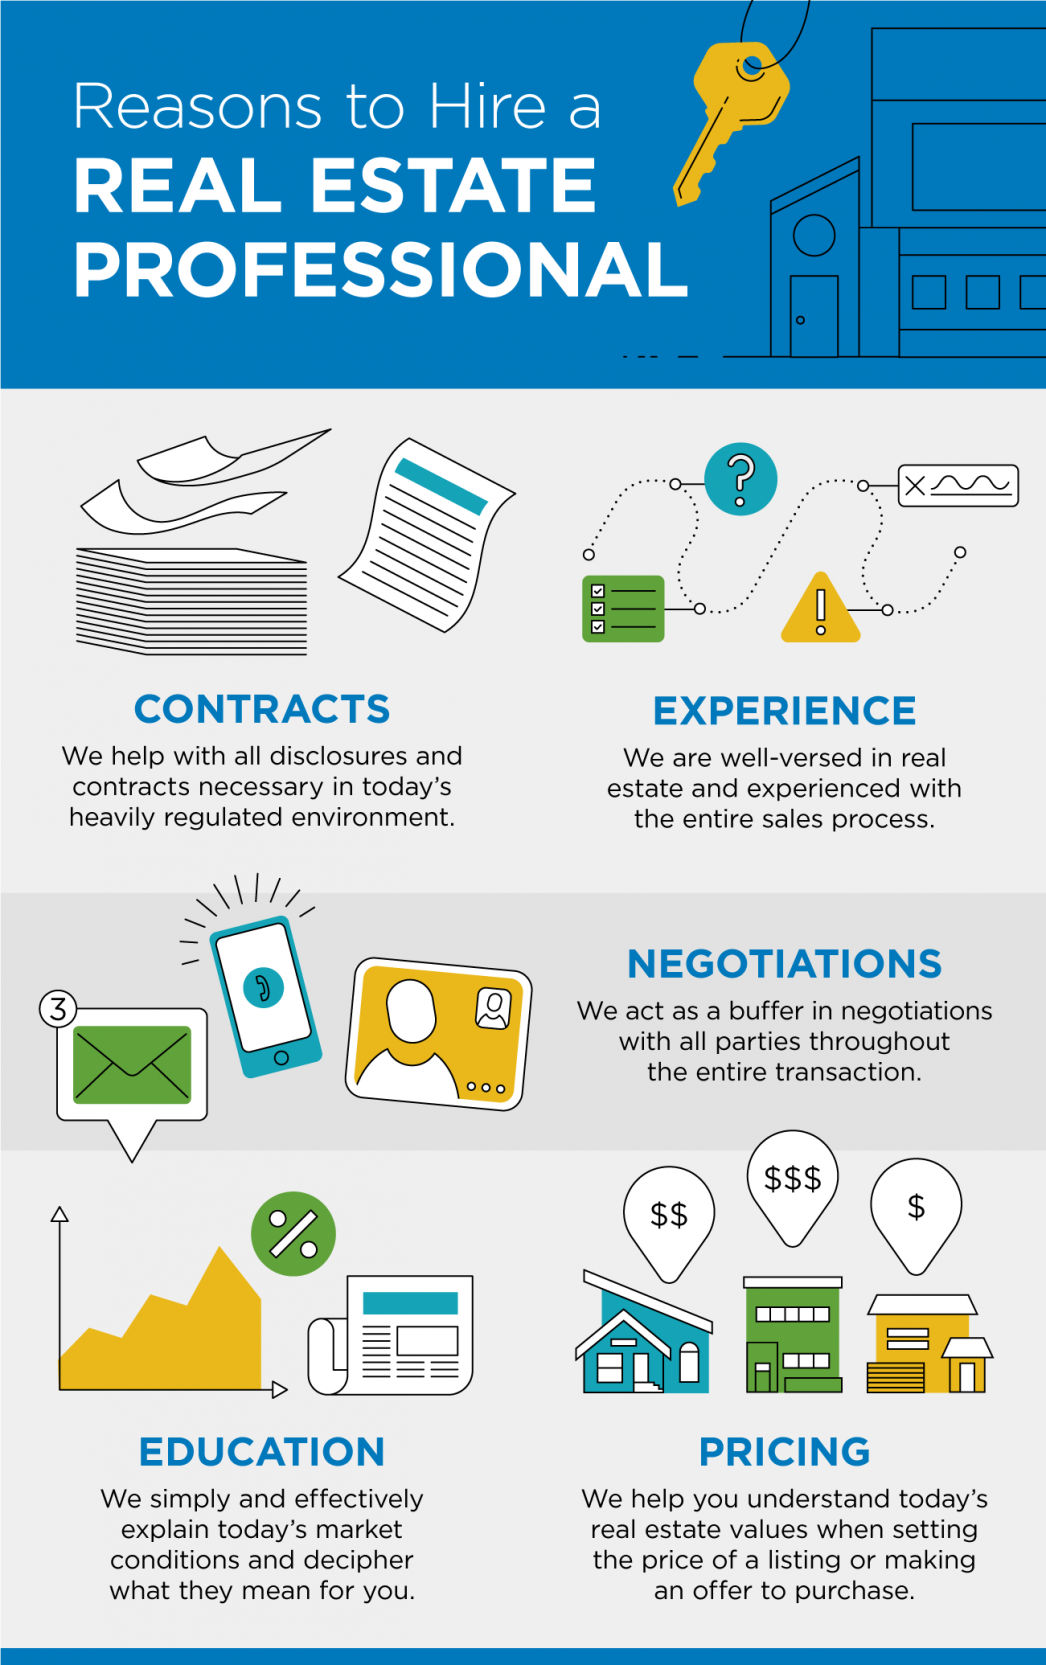 Reasons to Hire a Real Estate Professional [INFOGRAPHIC] | MyKCM